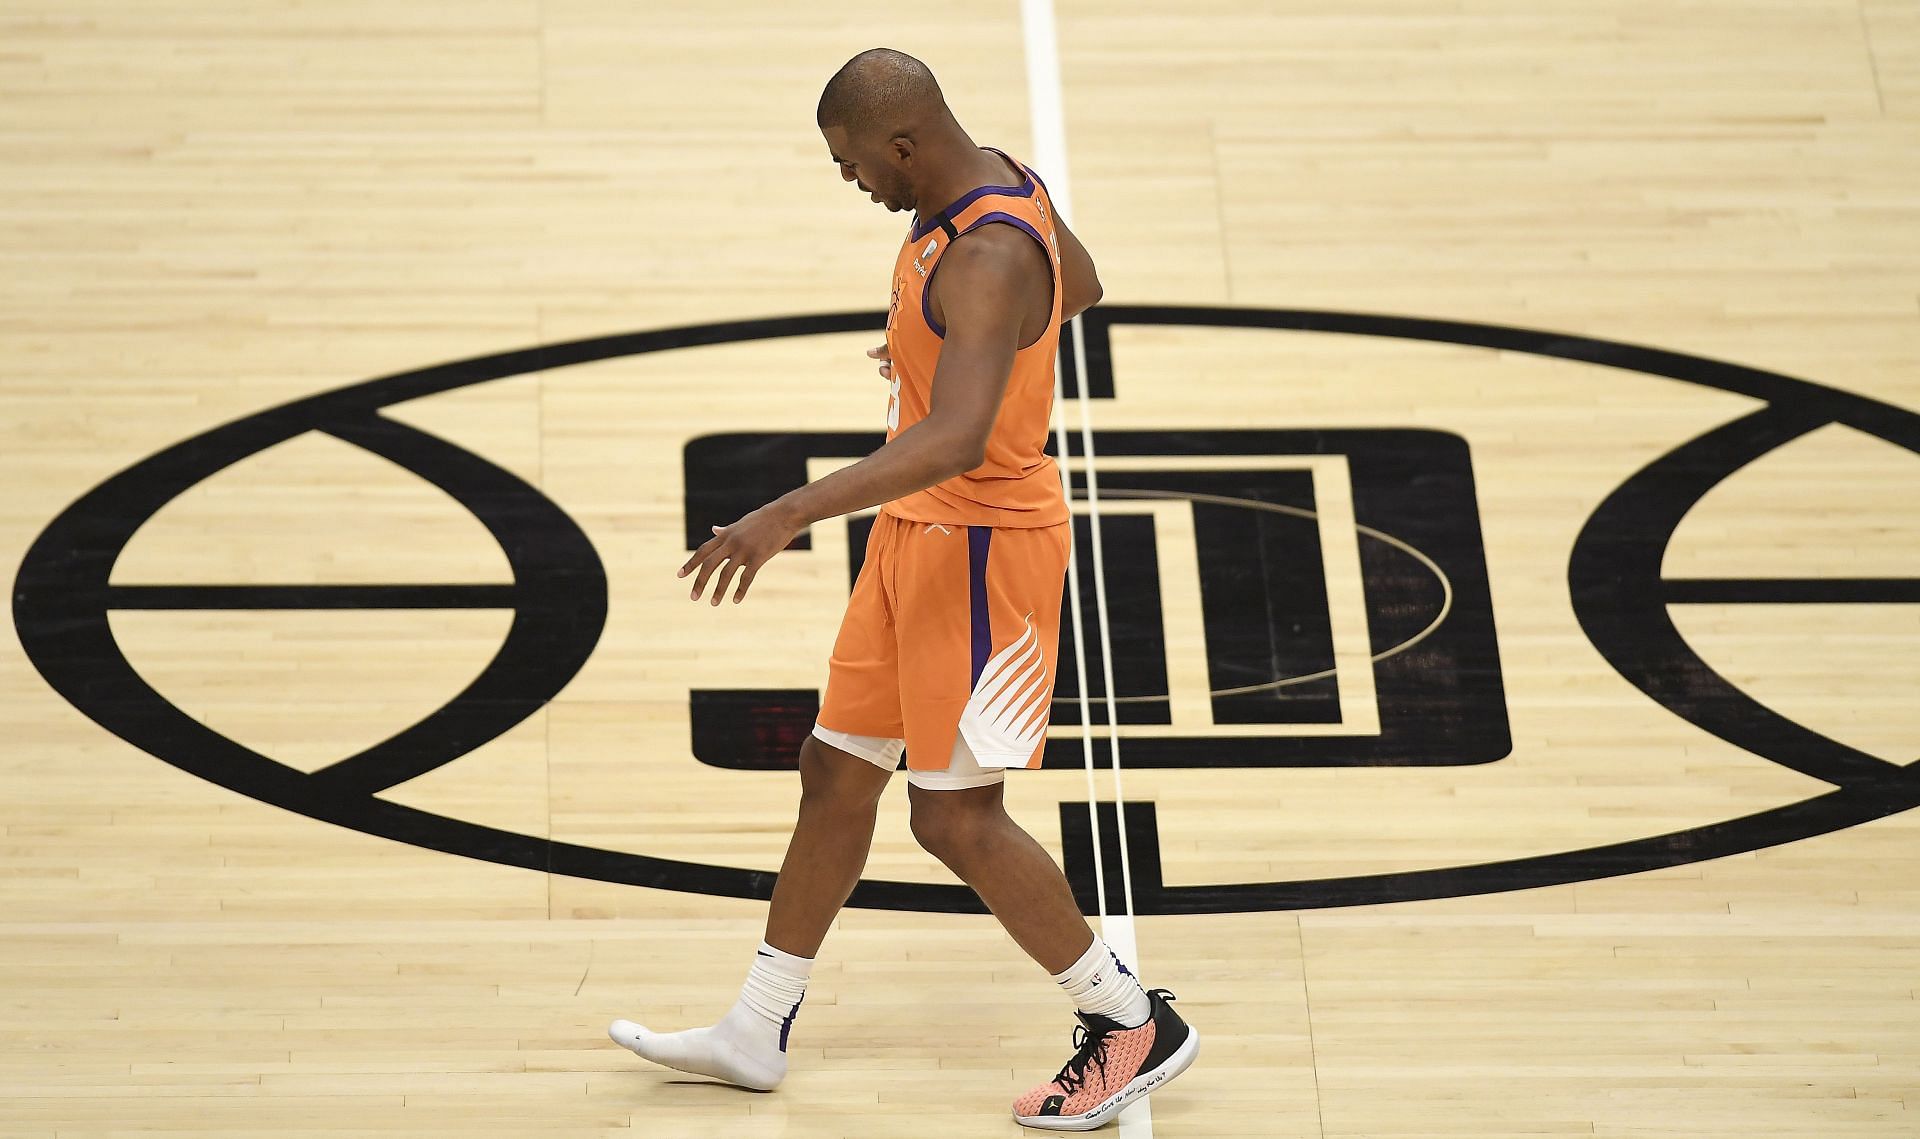 The Suns star may debut Chris Paul x Air Jordan 1 Low shoes at the start of the next season (Image via Getty Images)